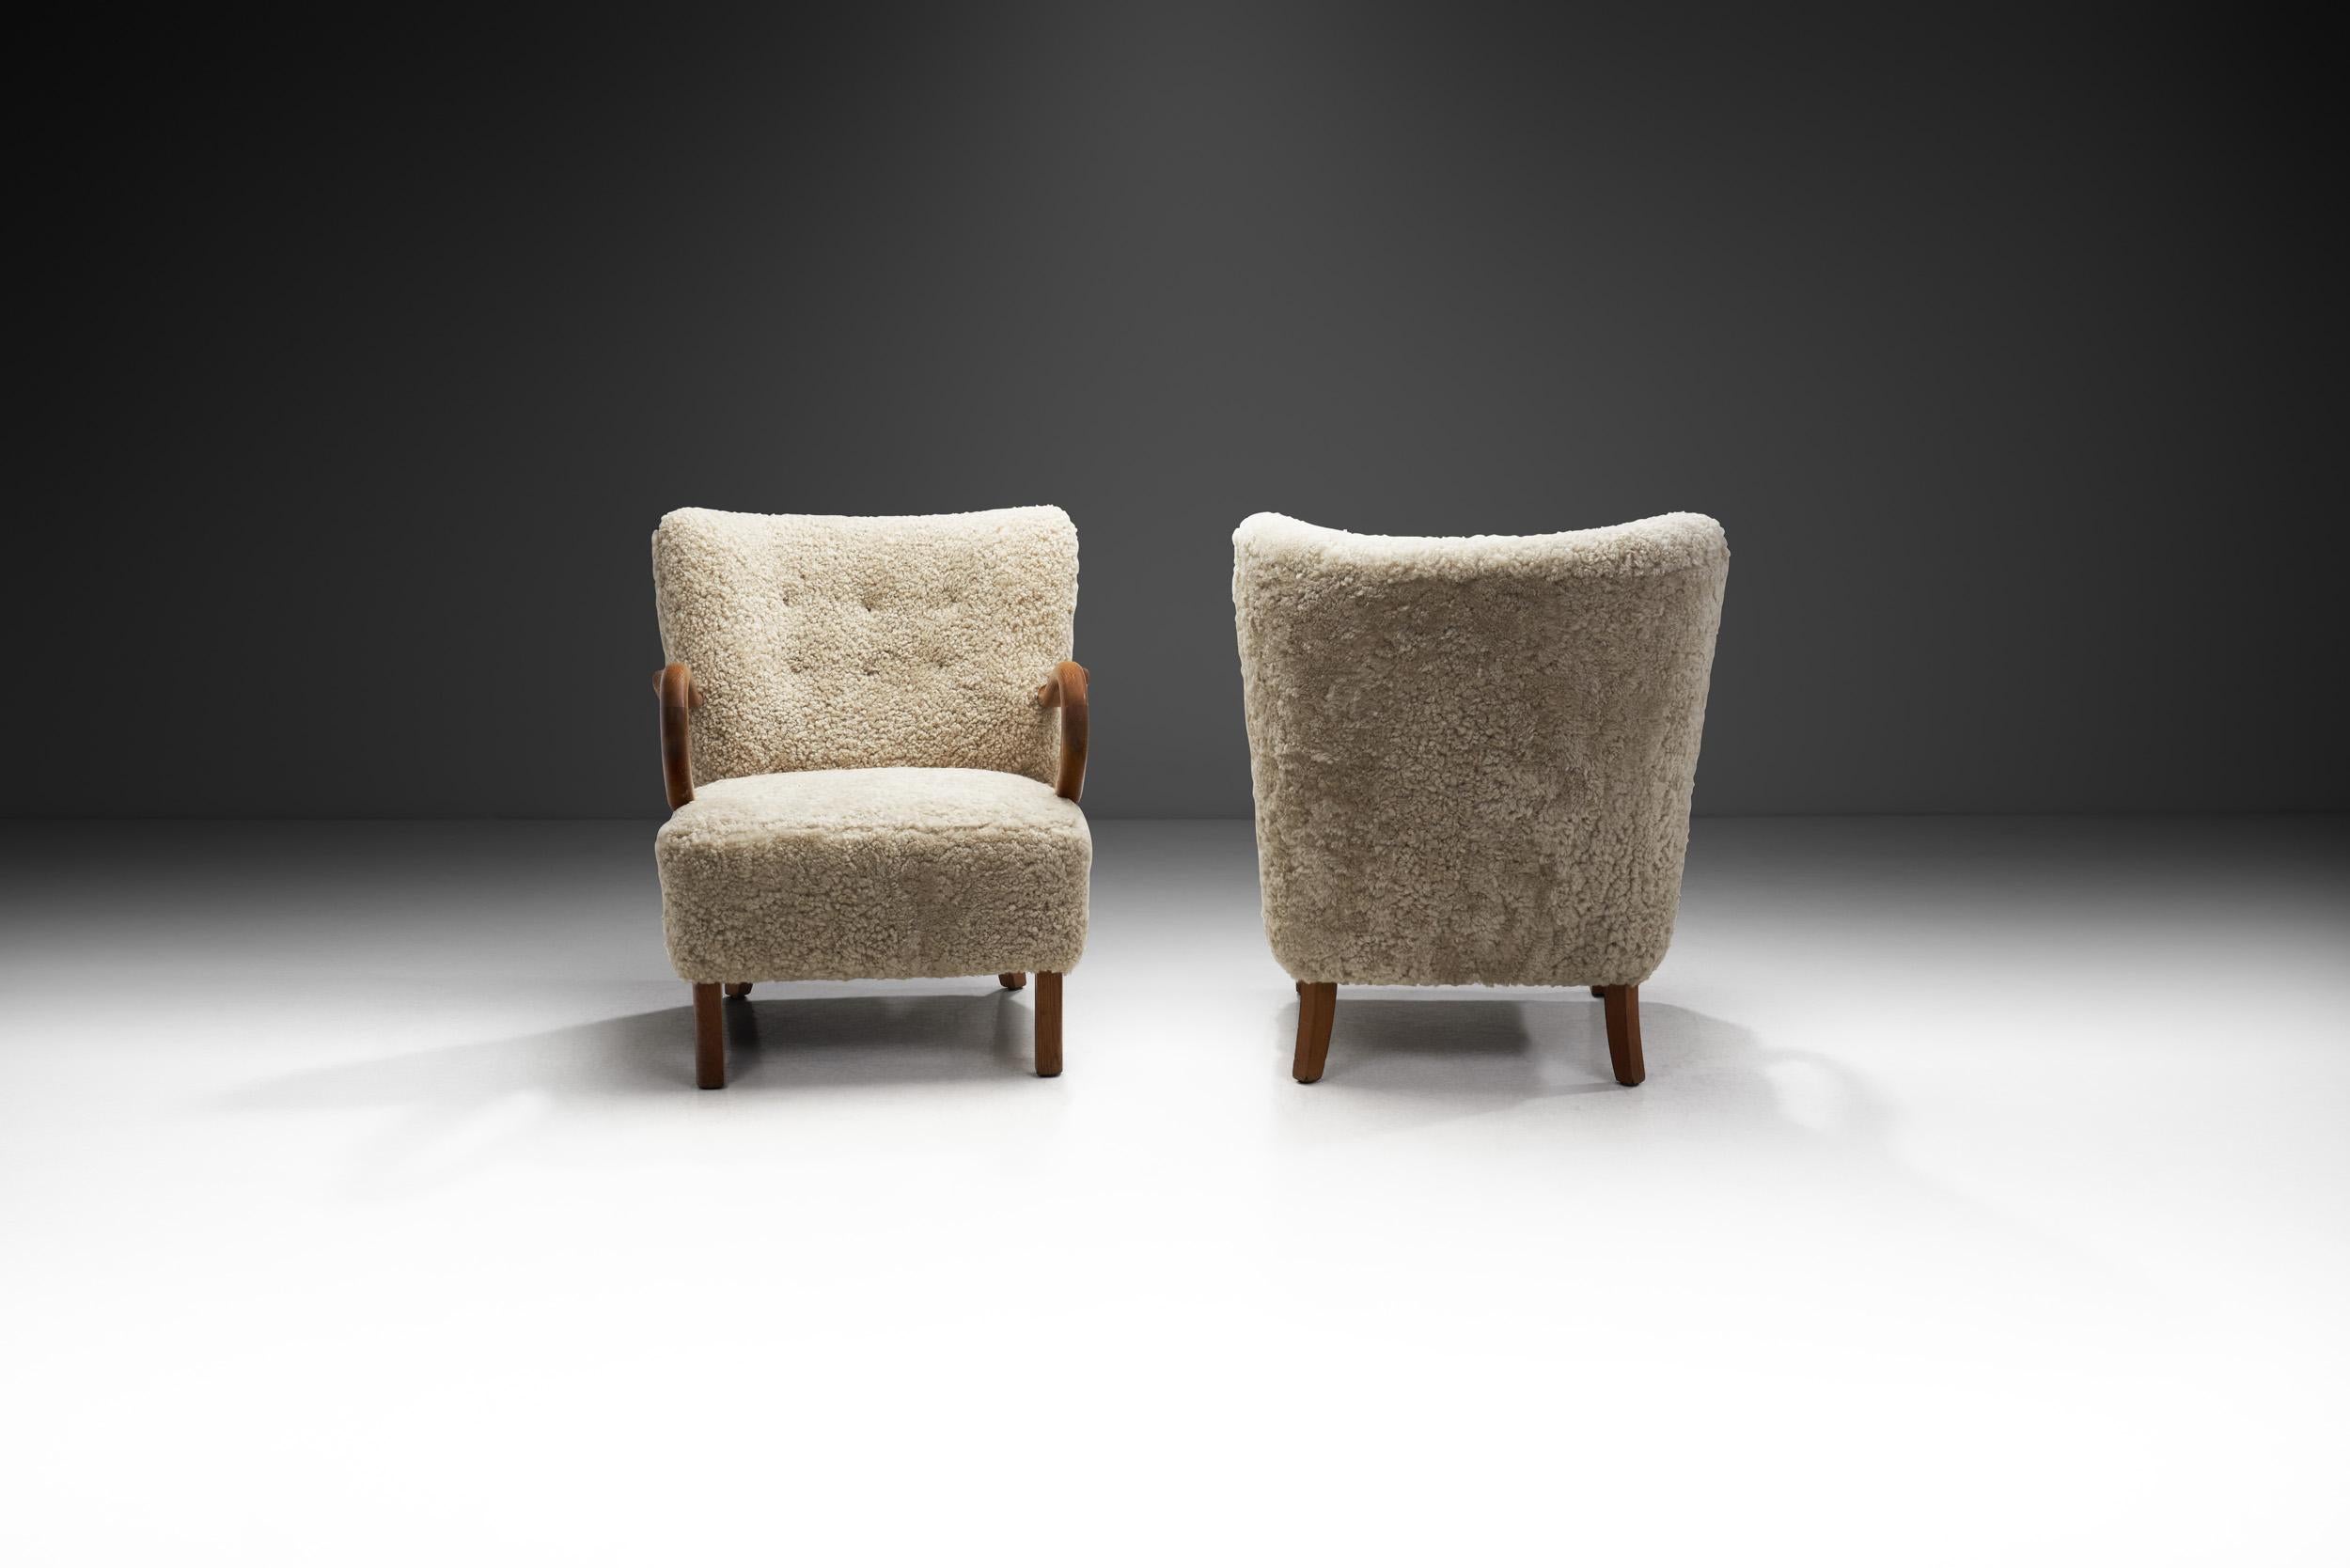 Mid-20th Century Danish Armchairs with Sculptural Oak Arms, Denmark, 1950s